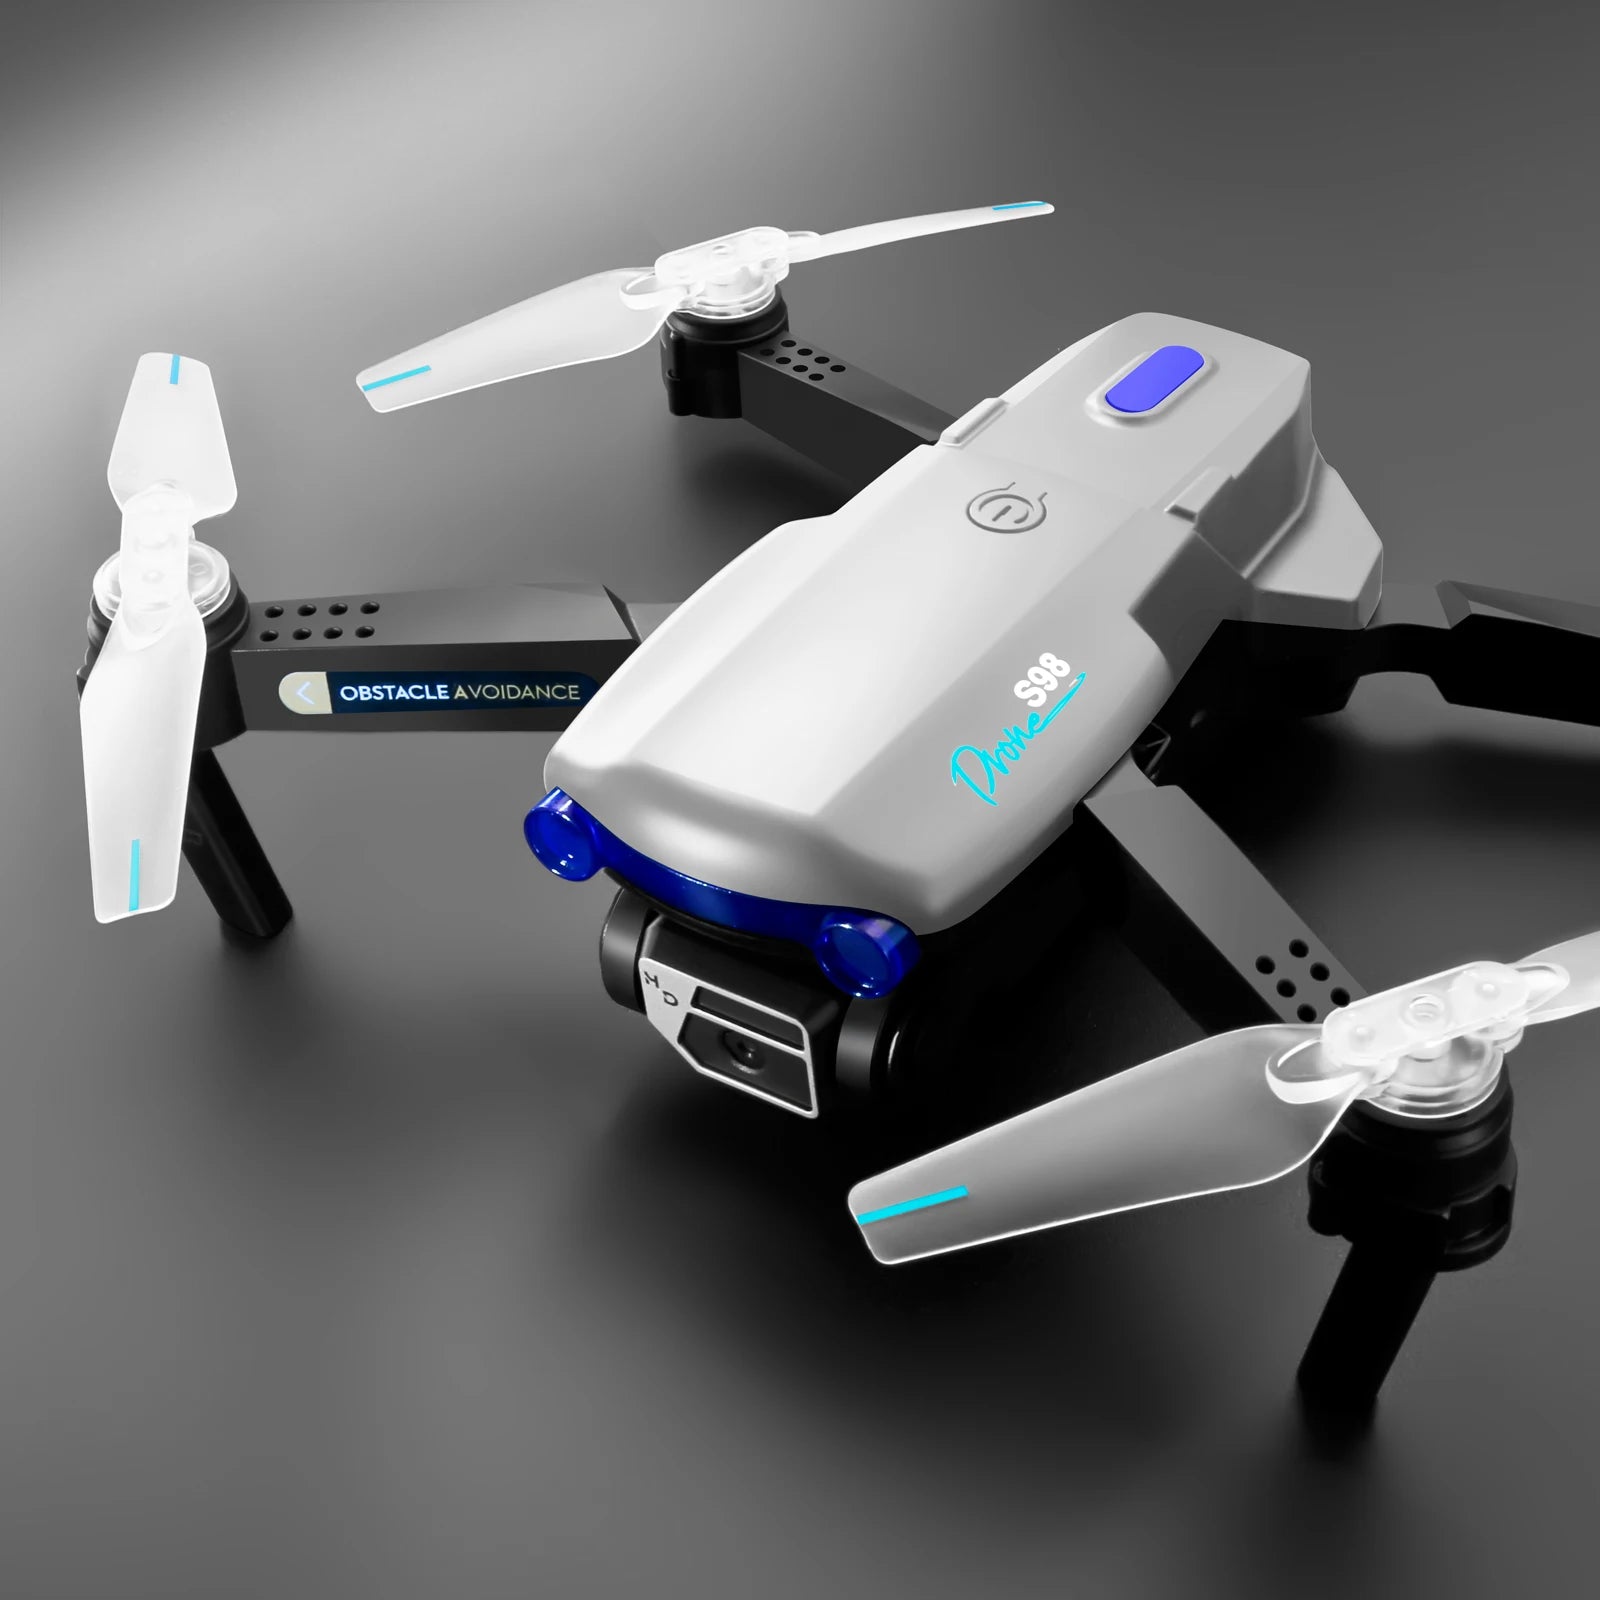 S98  Drone, kbdfa aerial photography s98 is a